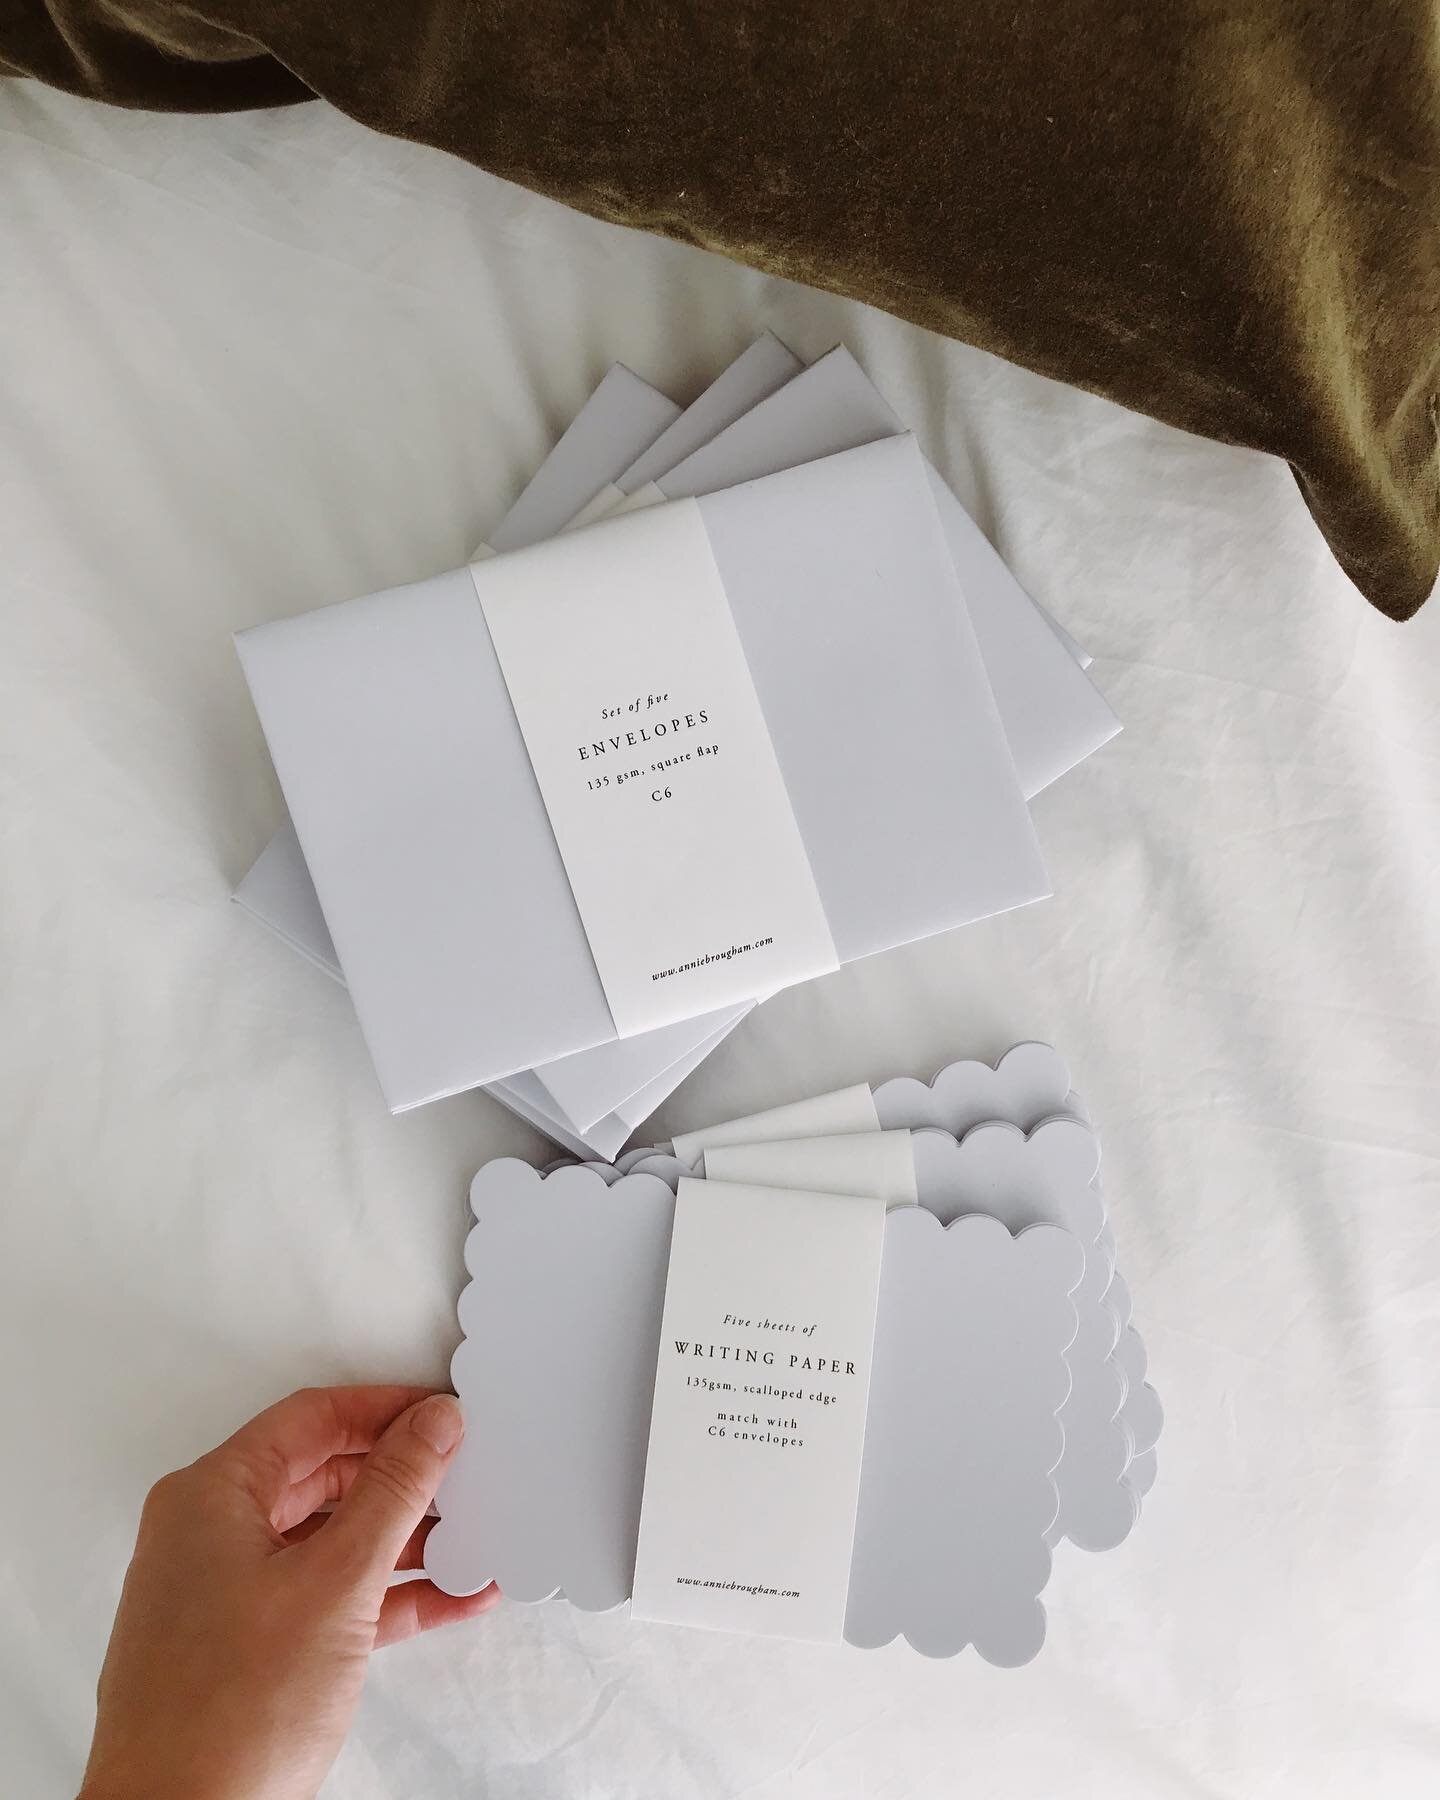 The scalloped writing paper sets are almost out of stock.. thinking I might try out a mew shade for the restock..🤔🤗 any thoughts?

#darlingmovement #poetryofsimplethings #livemoremagic #snailmailrevolution #theartofslowliving #ofwhimsicalmoments #s